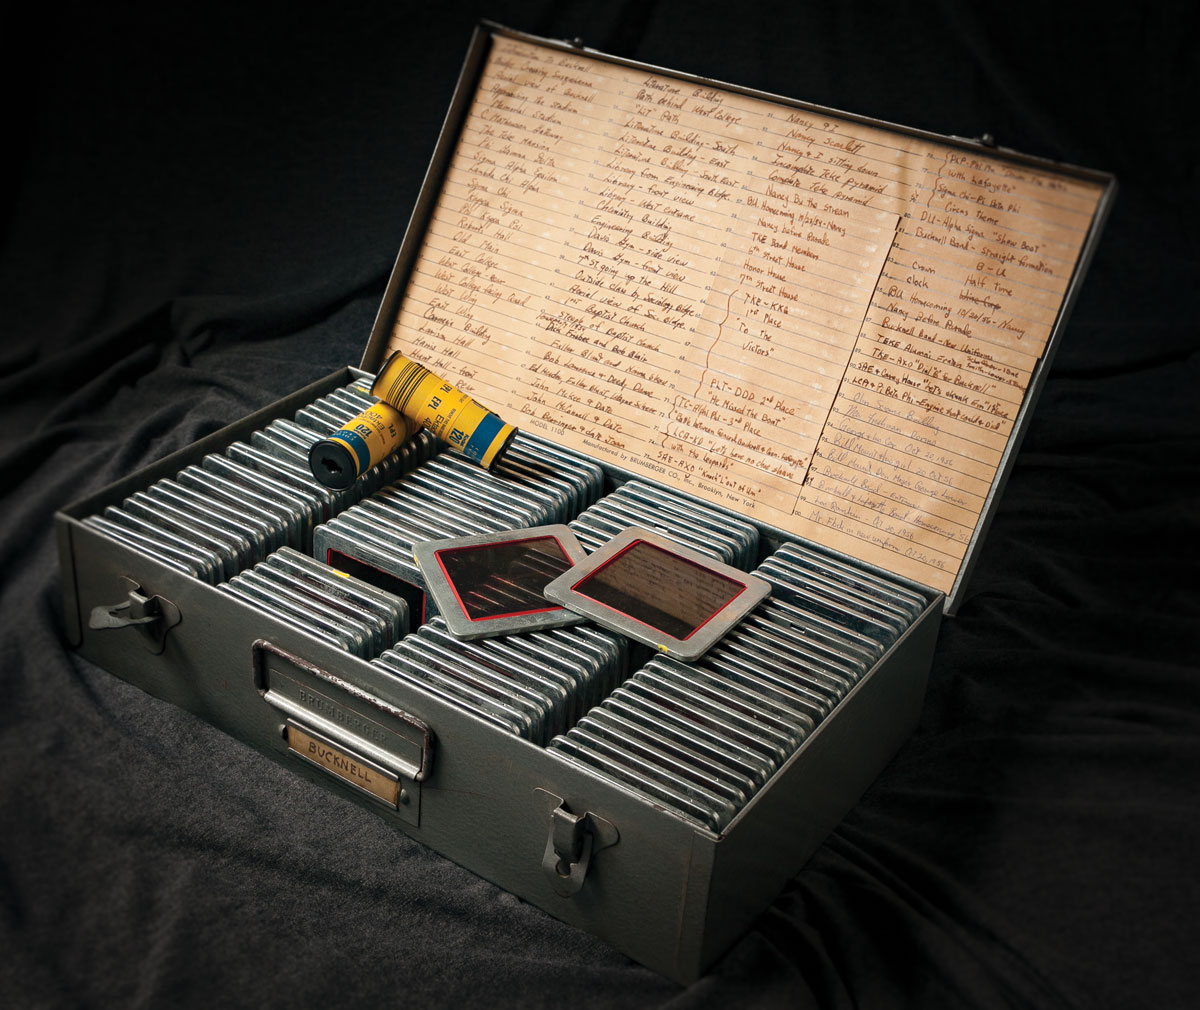 Box of images on slides from the 1950's